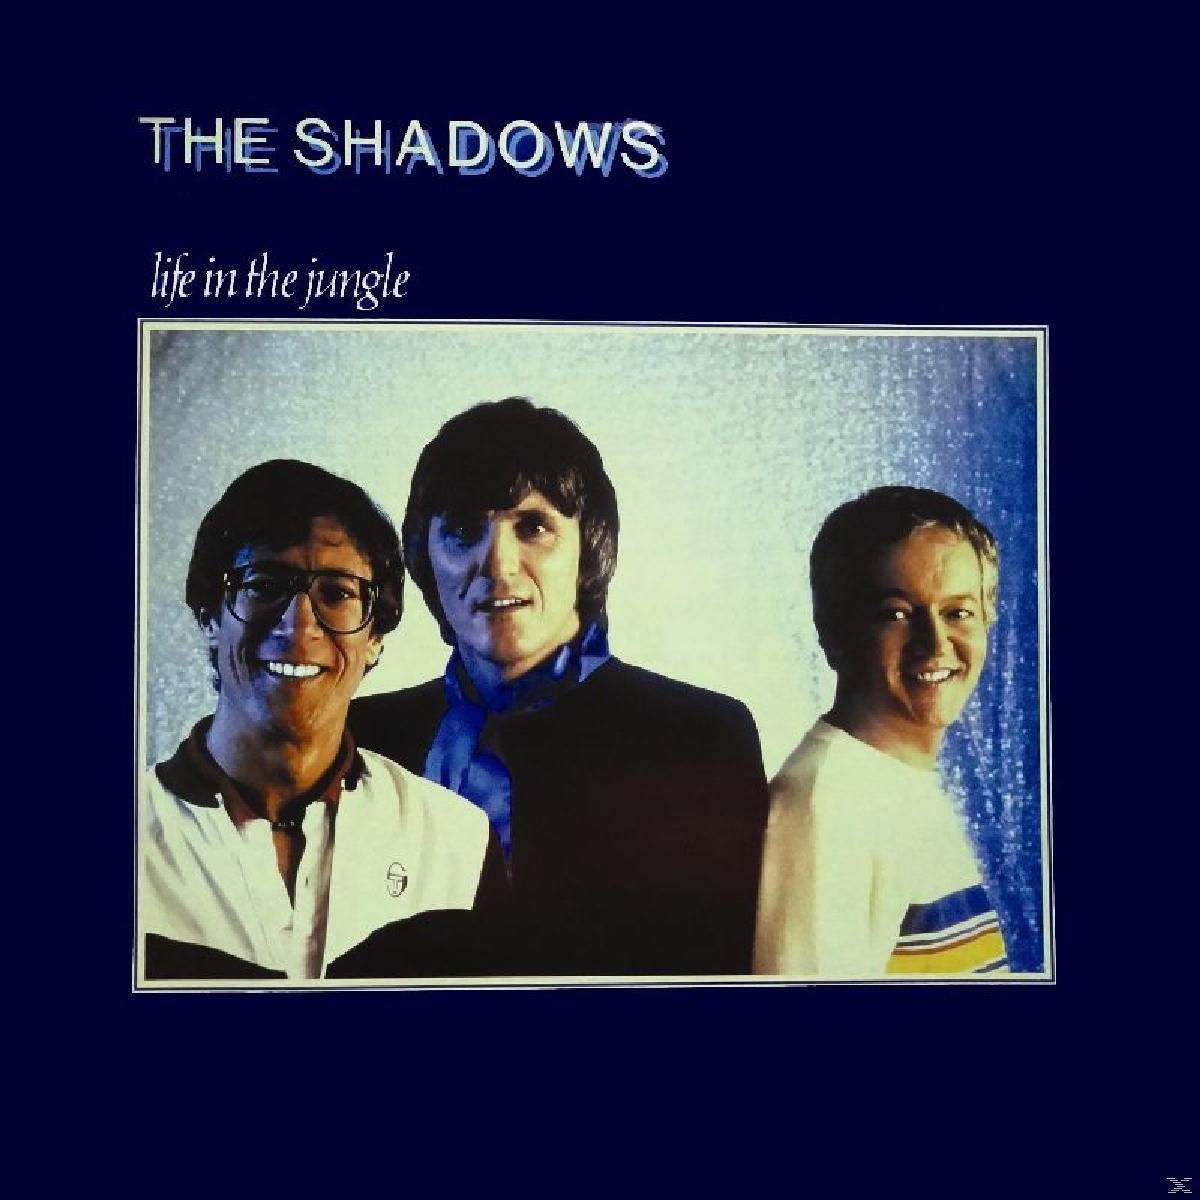 The Shadows (CD) Jungle In Life The - 